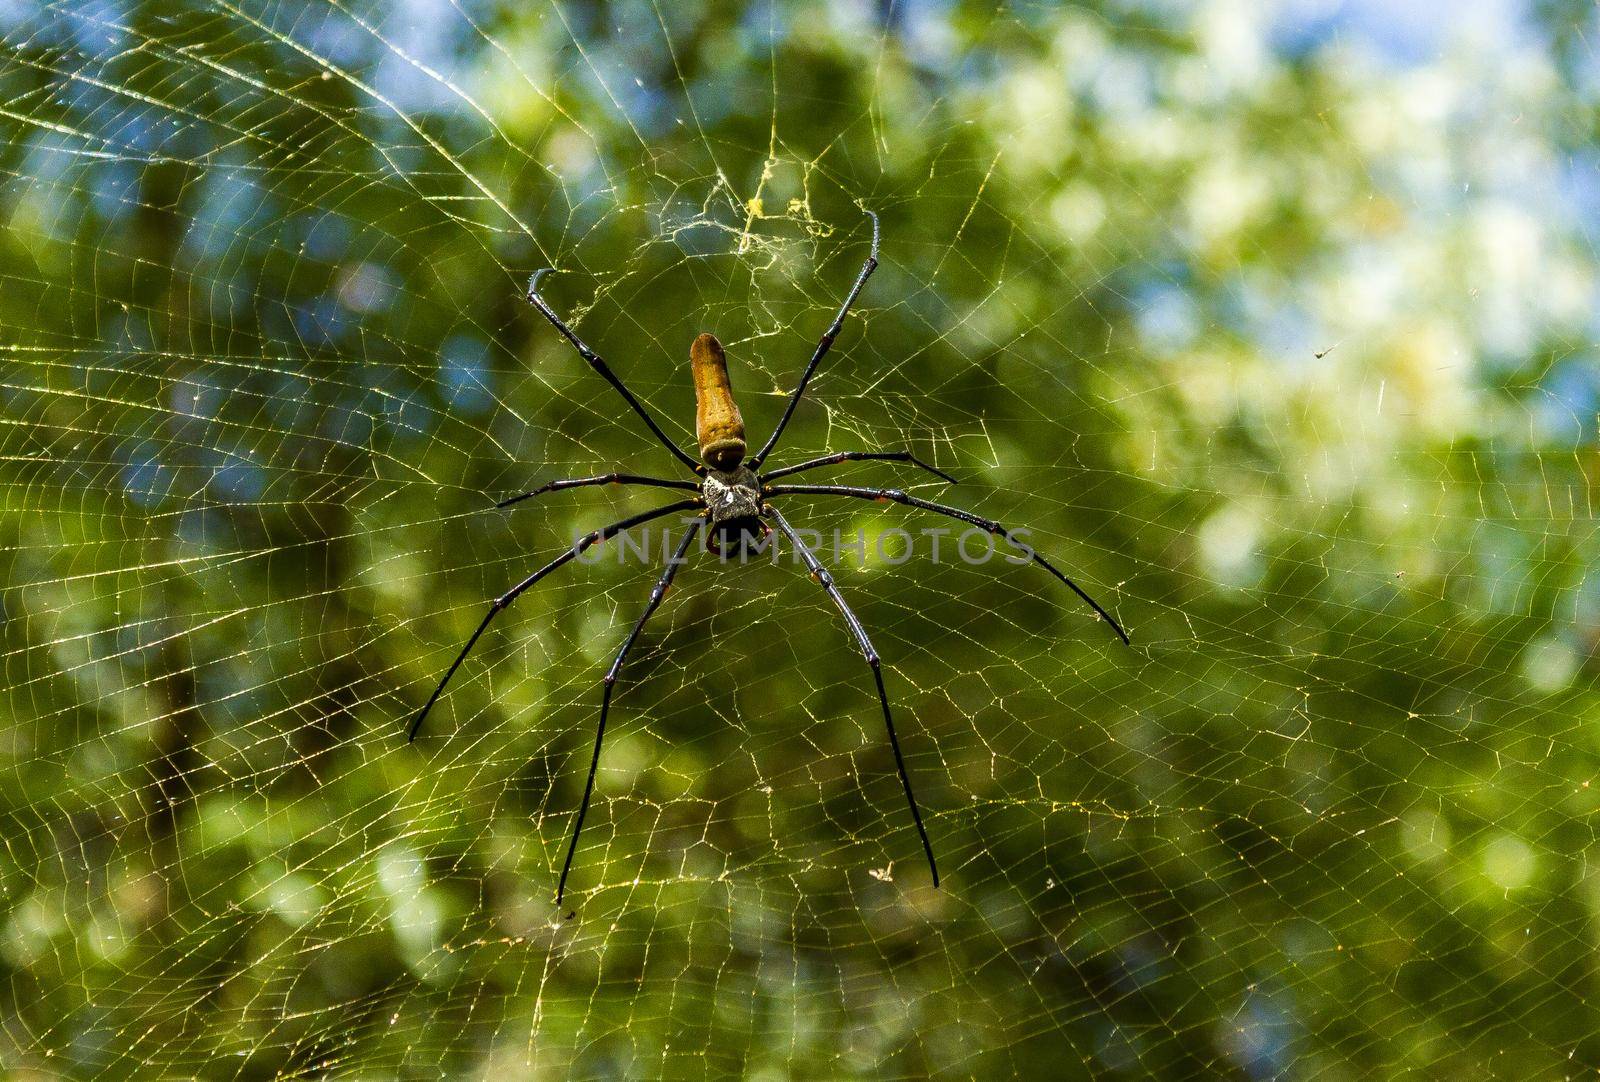 A large northern golden orb weaver or giant golden orb weaver spider Nephila pilipes typically found in Asia and Australia, lichtfield national park by bettercallcurry